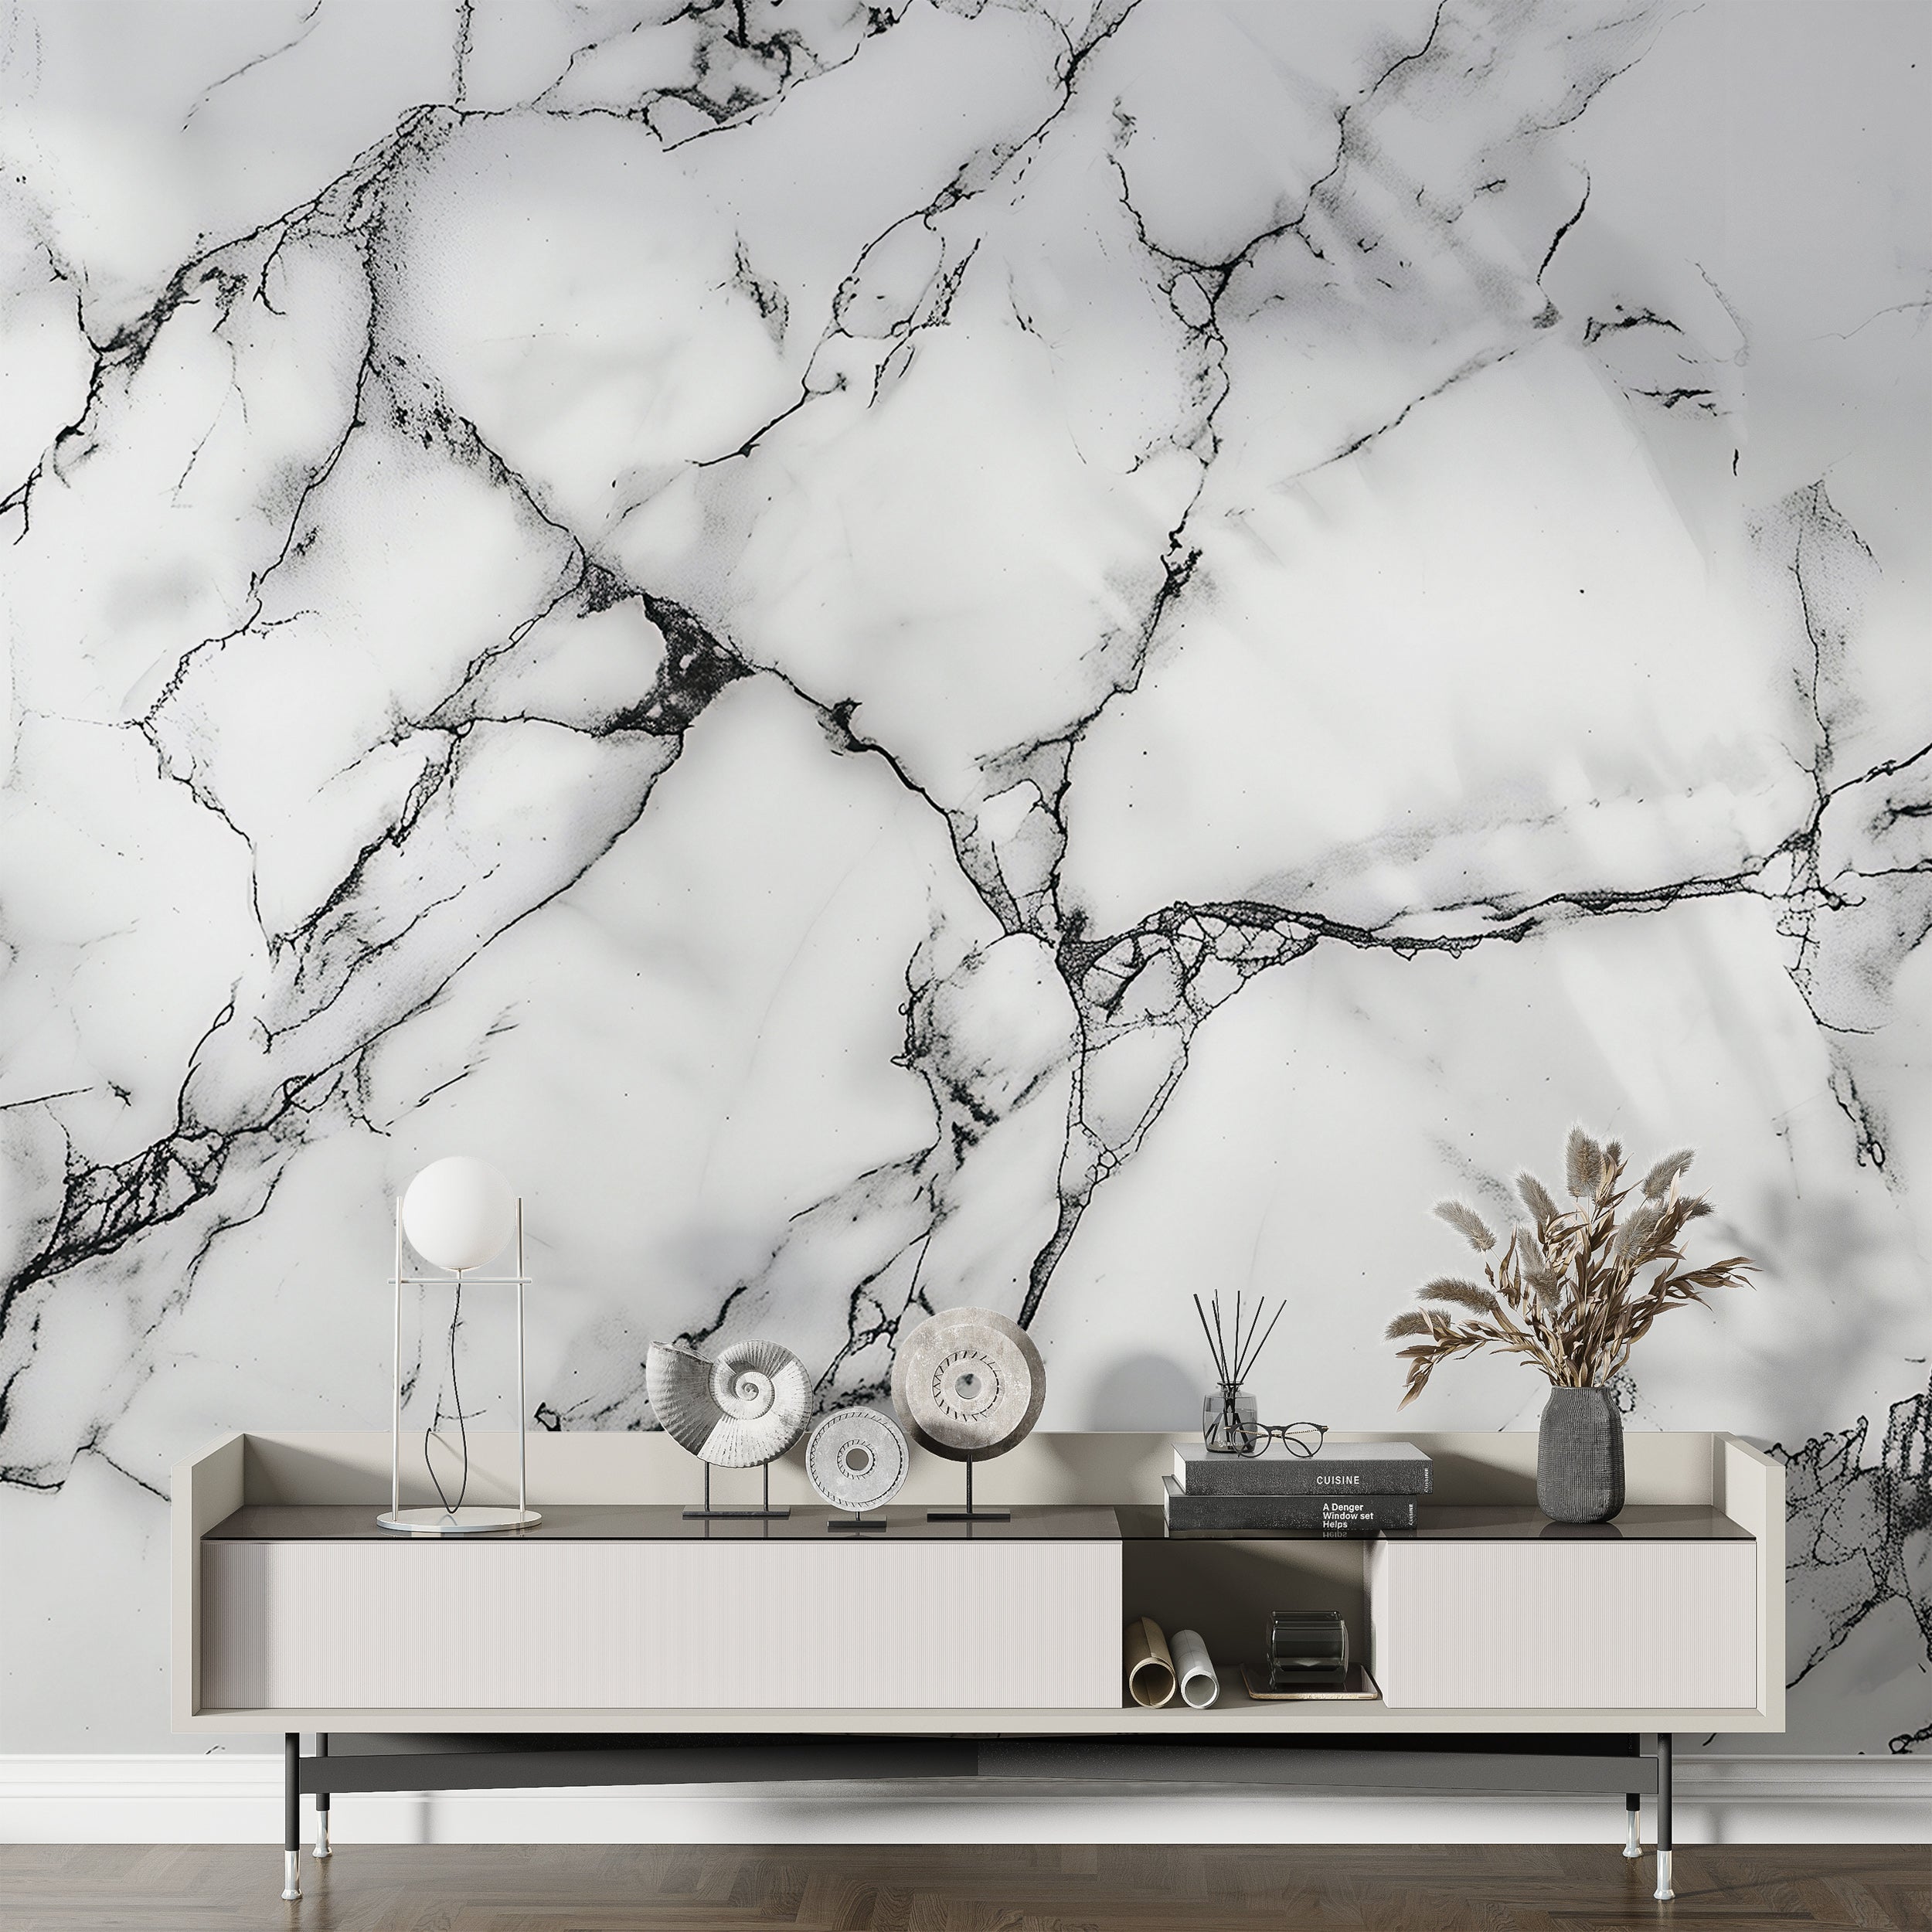 Black&White Marble Mural, Self-adhesive Natural Marble Wallpaper, Stone Texture Mural, Removable White Marble with Black Lines Decor